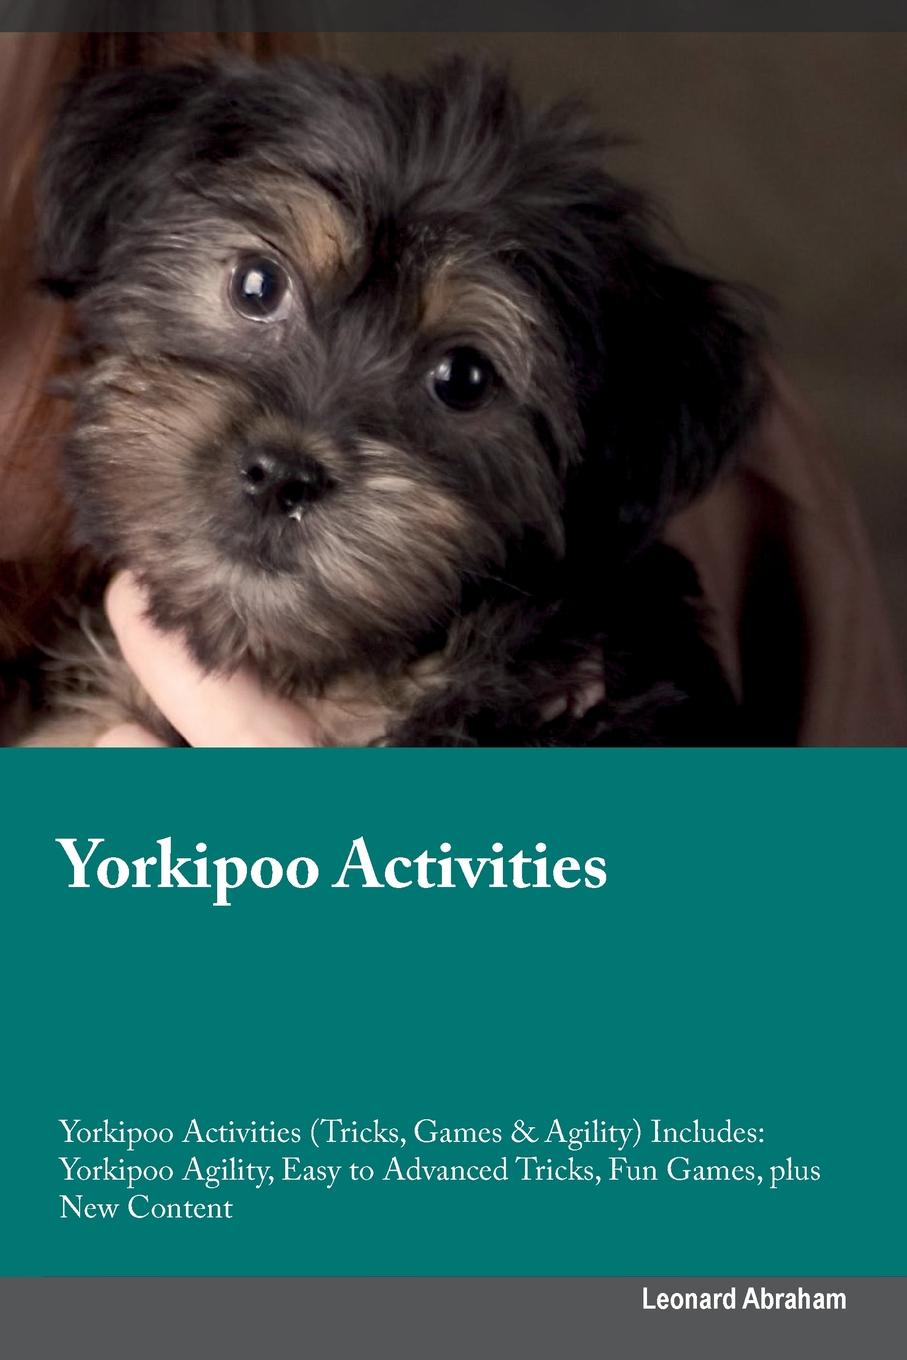 Yorkipoo Activities Yorkipoo Activities (Tricks, Games & Agility) Includes. Yorkipoo Agility, Easy to Advanced Tricks, Fun Games, plus New Content